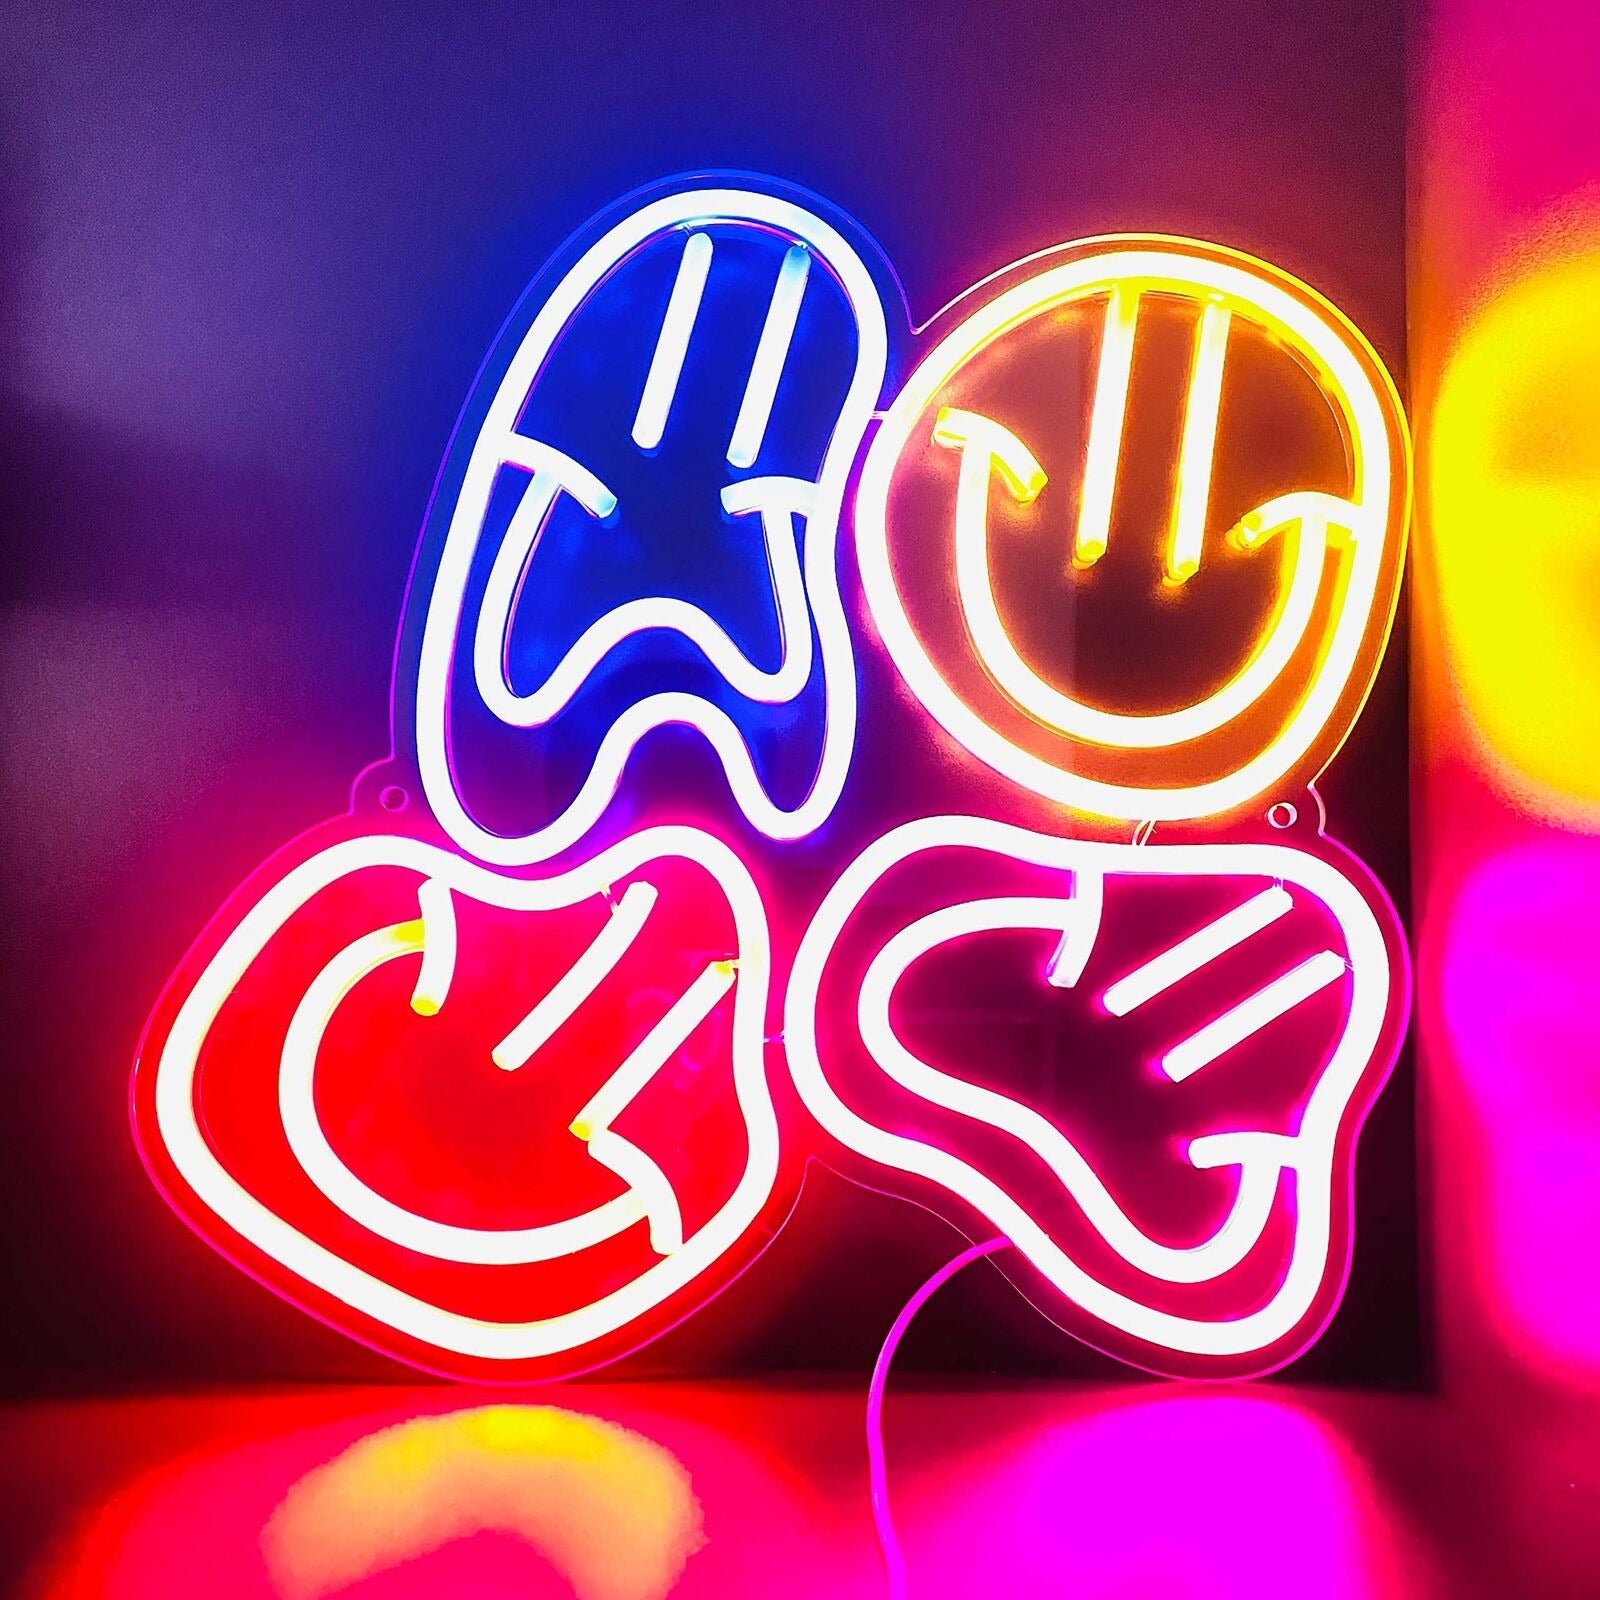 The lighting of a LED neon sign play a significant role